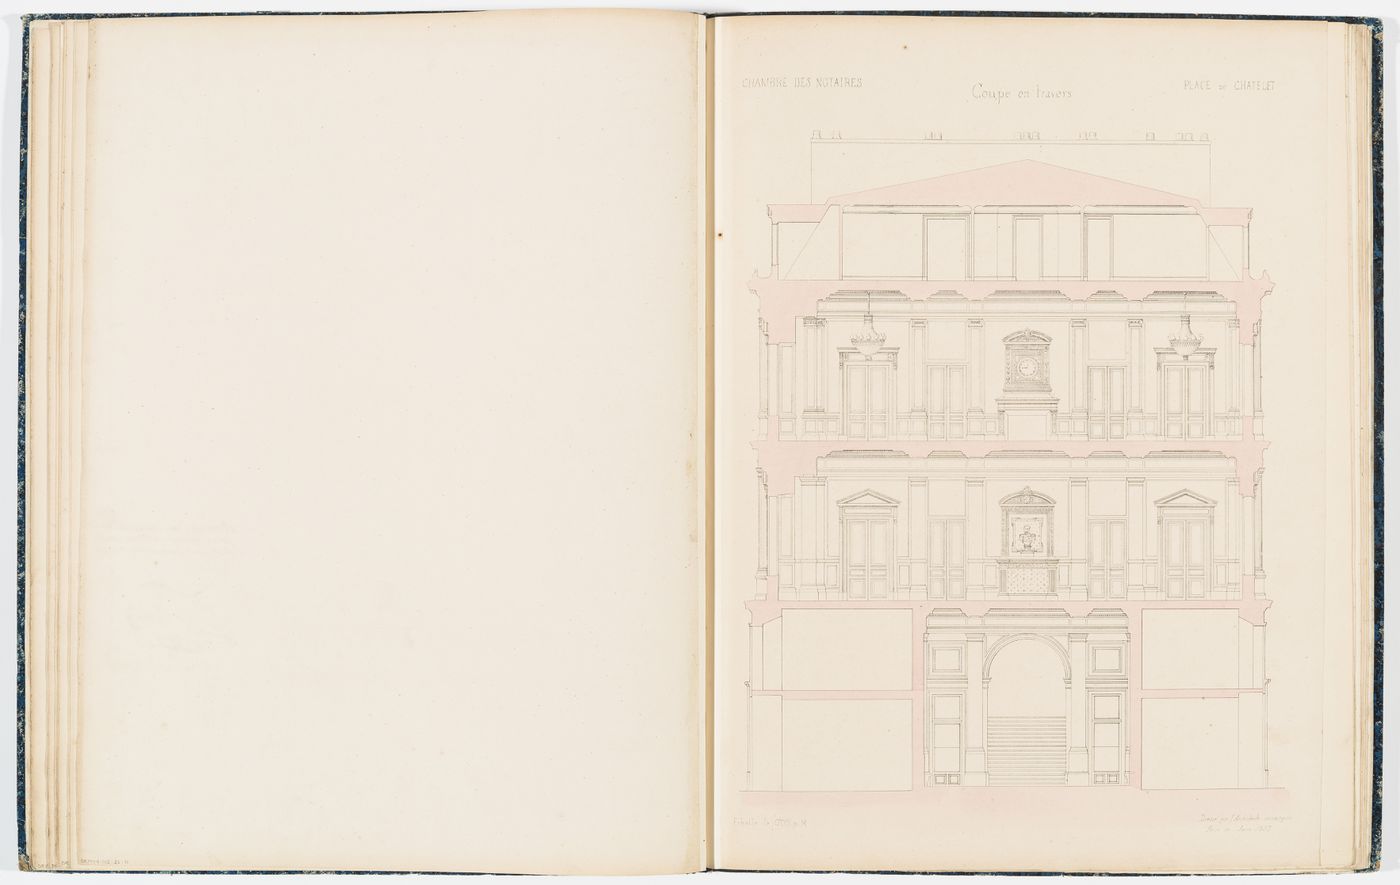 Cross section for the Chambre des Notaires showing details of the "salle de vente" and the "salle d'assemblées"